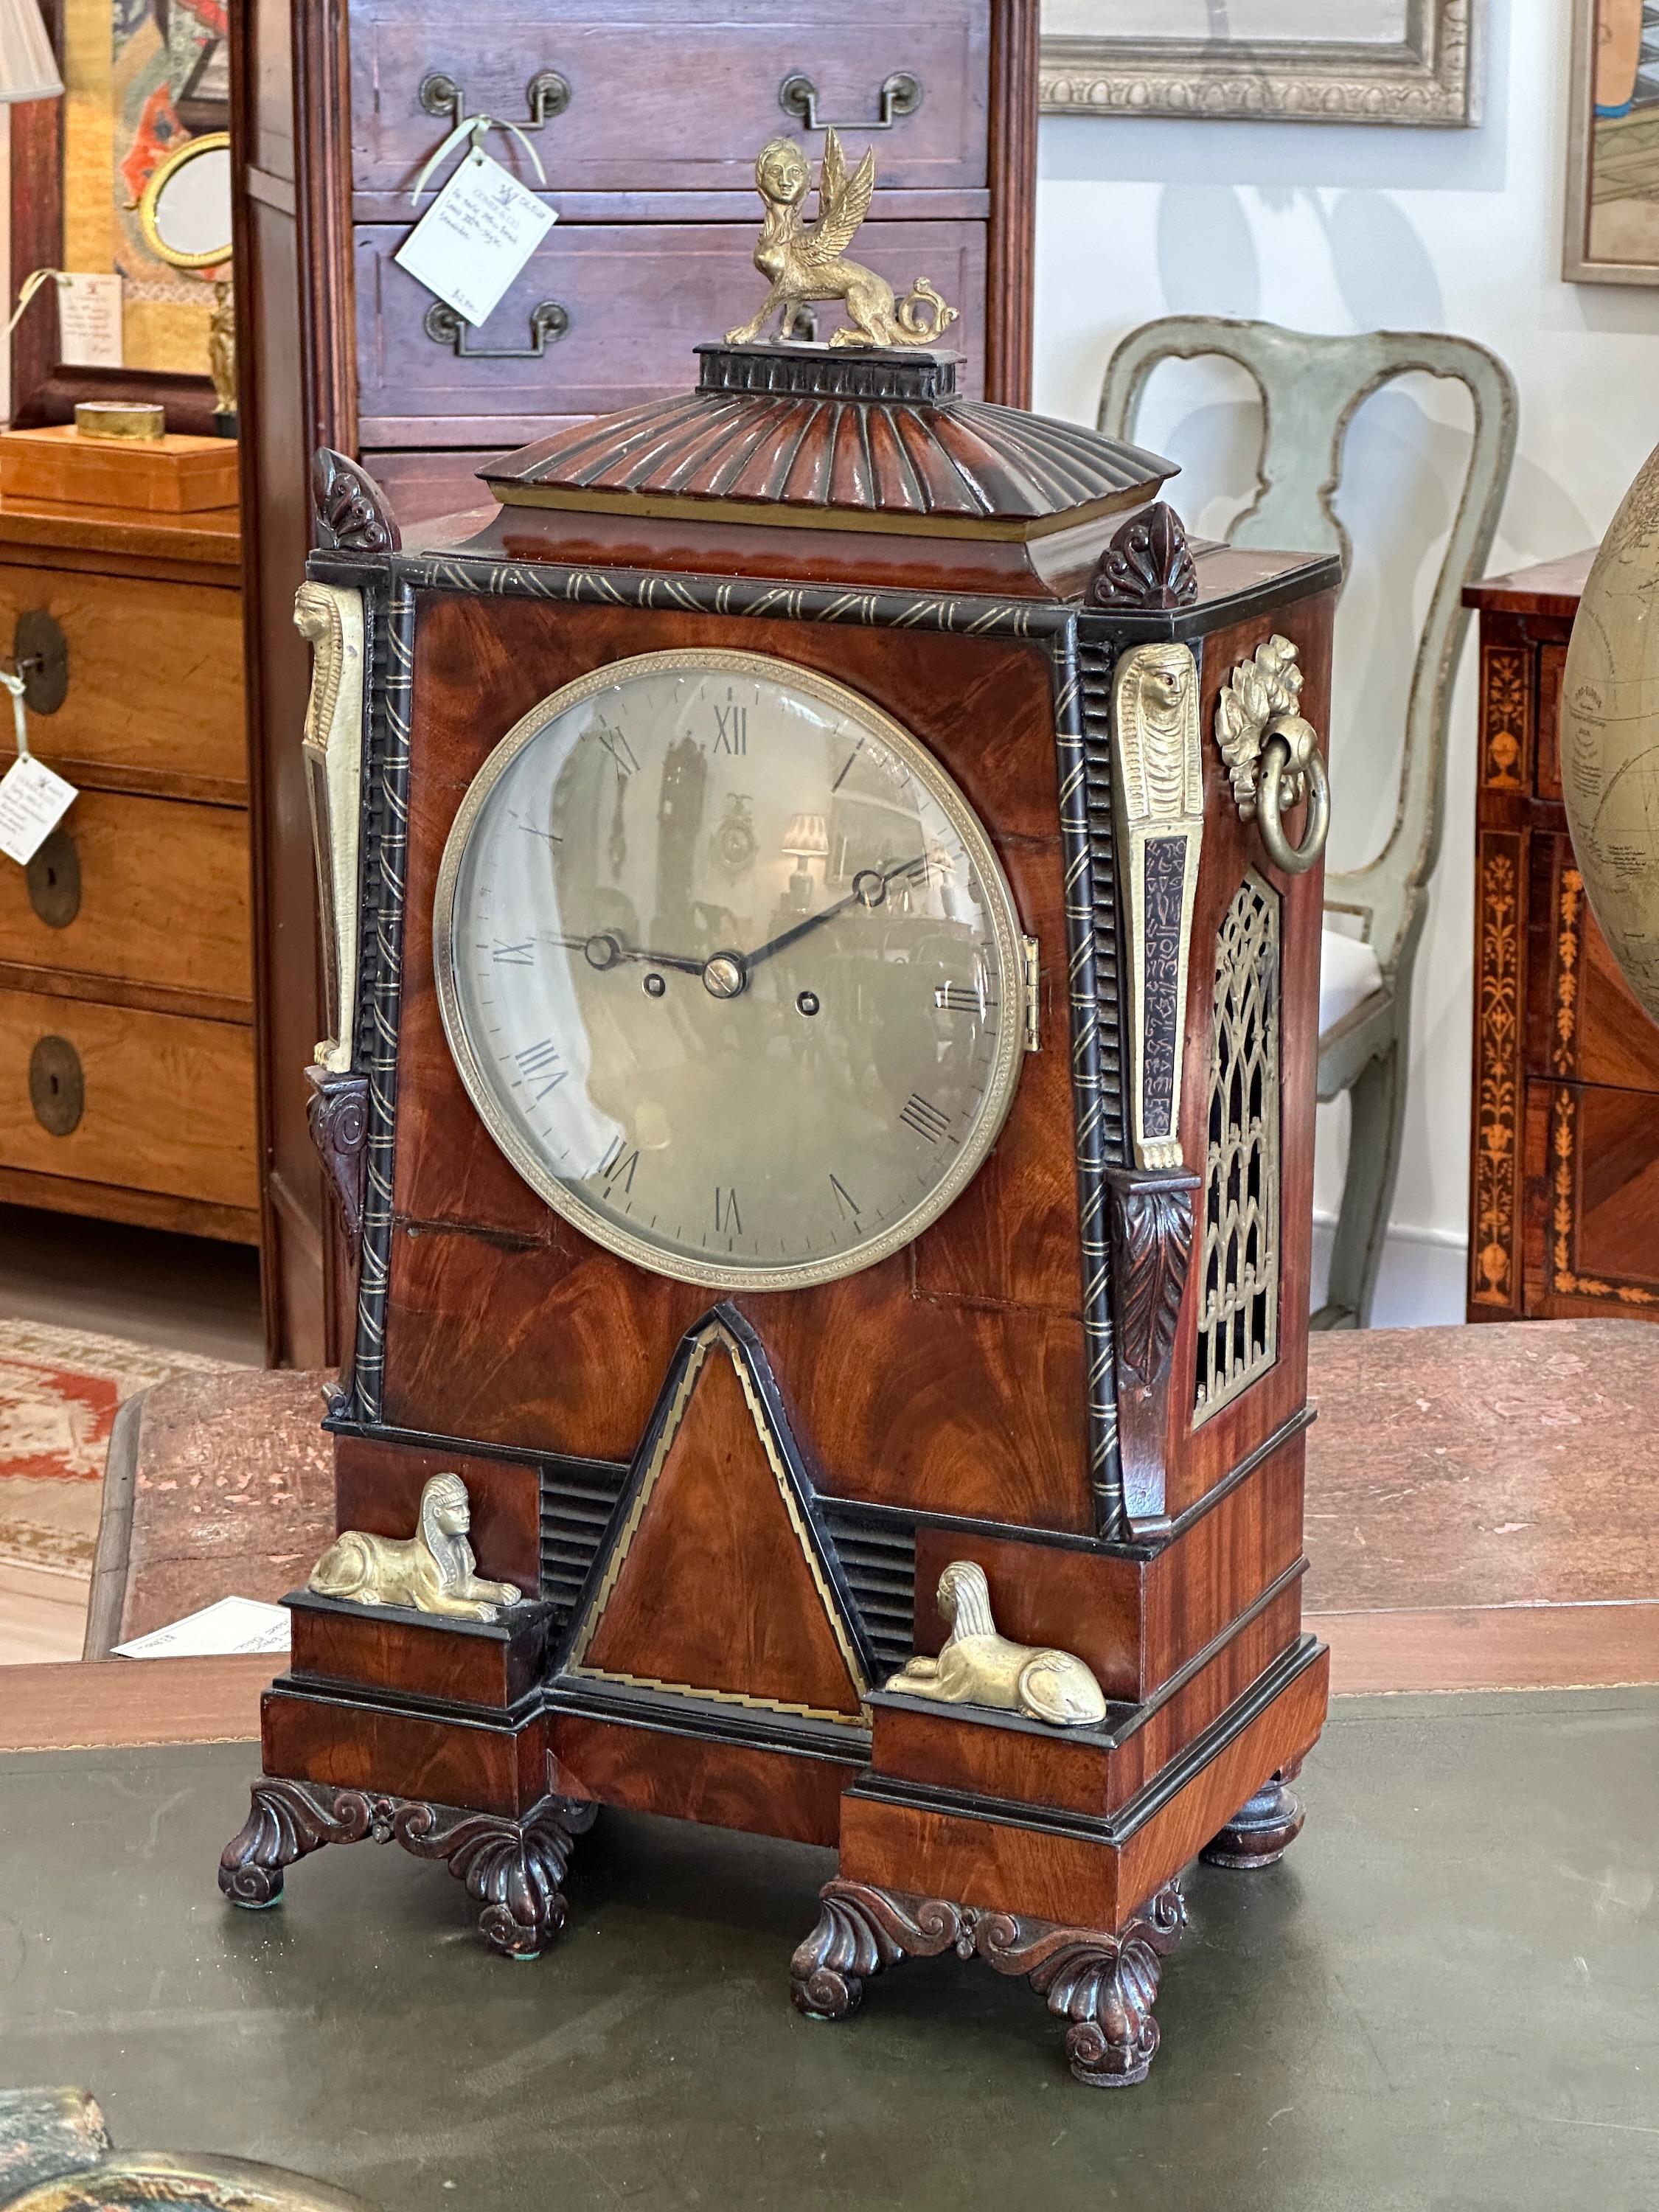 A large and impressive early 19th C. English Regency period Egyptian Revival bracket clock. The mahogany case is ornamented throughout with sphinx, obelisks, hieroglyphics and other Egyptian themes.